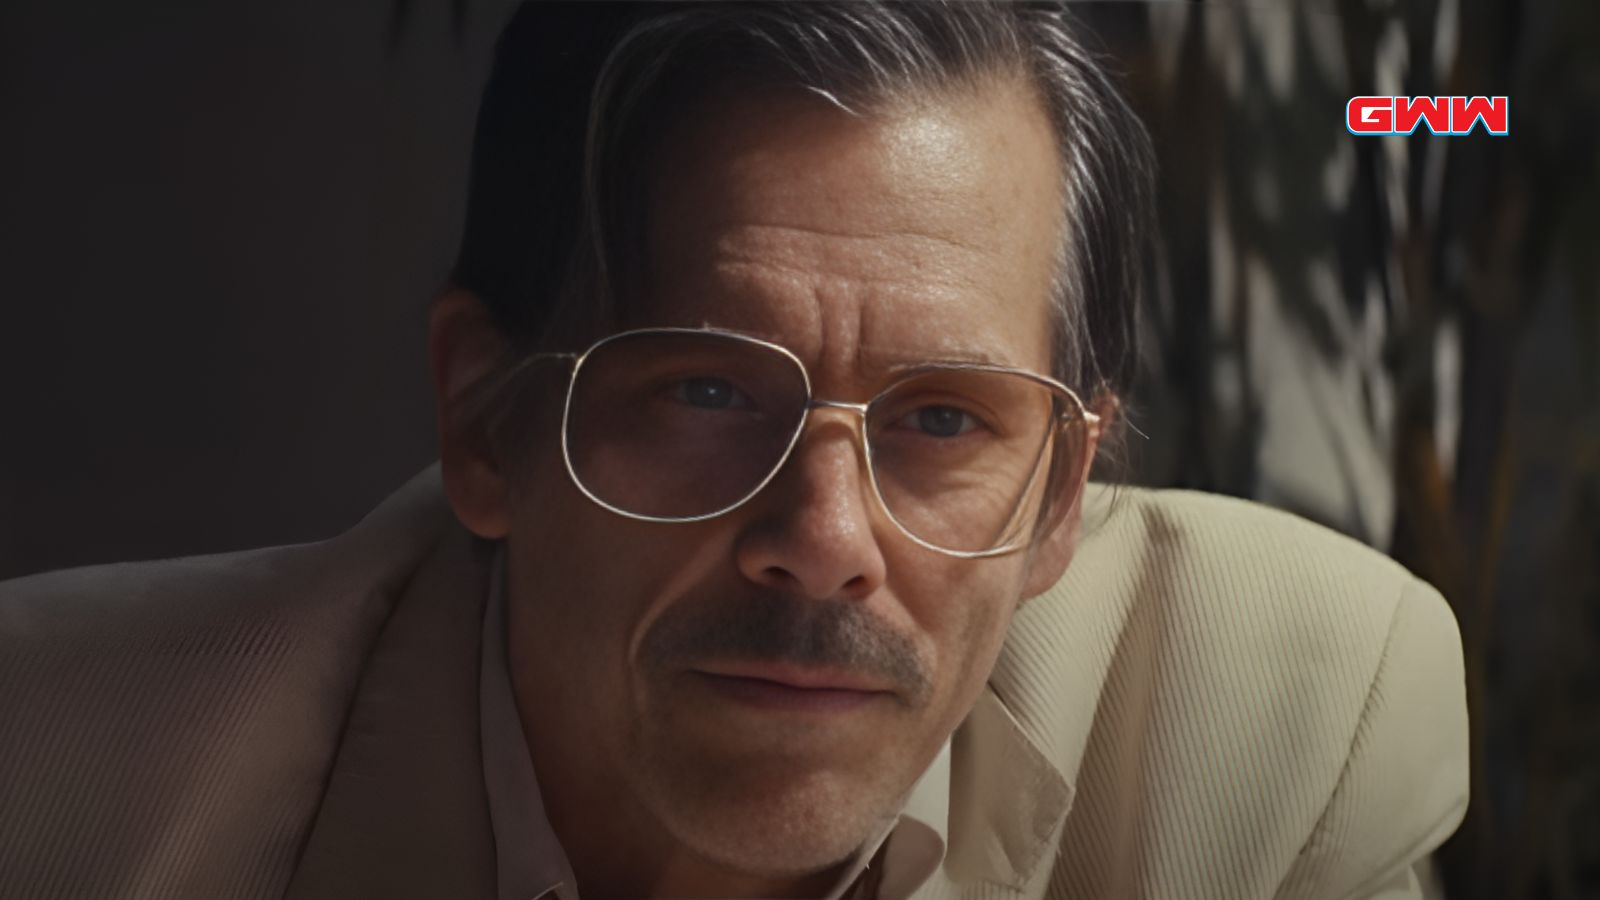 Kevin Bacon with glasses and mustache, wearing a beige suit.